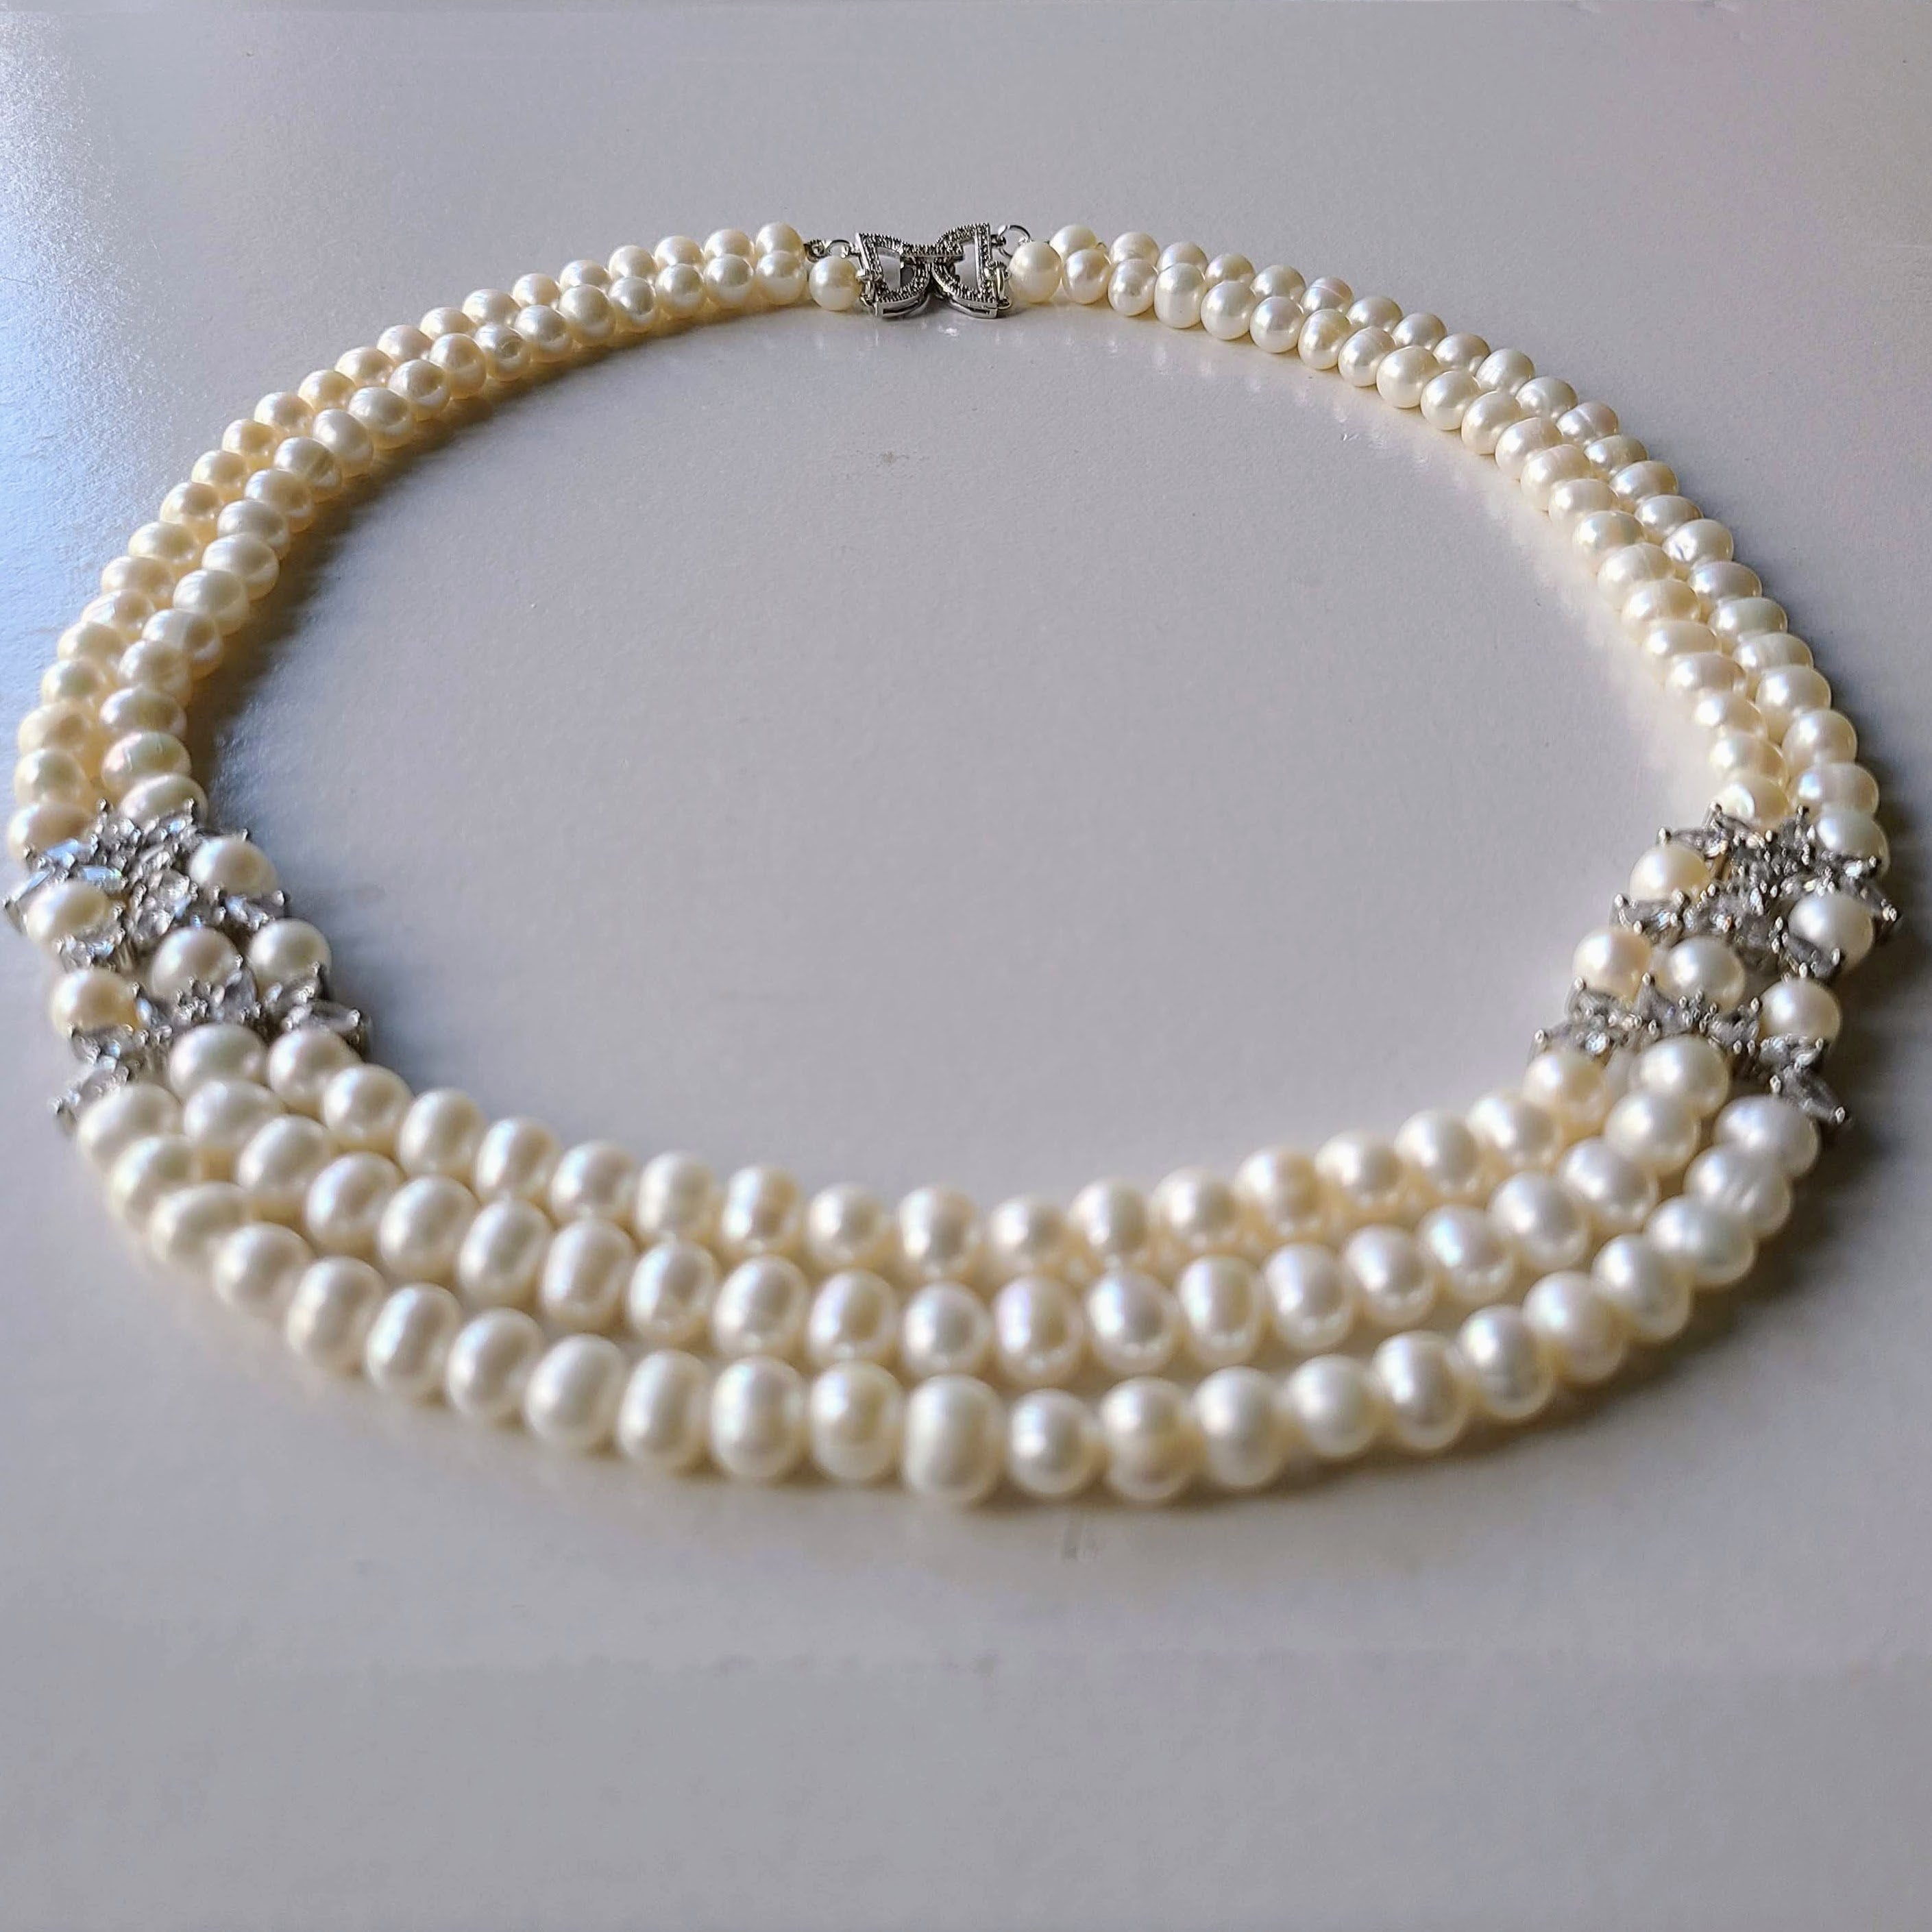 Freshwater Pearl Necklace, 3 Strand Pearl Necklace, White Freshwater ...